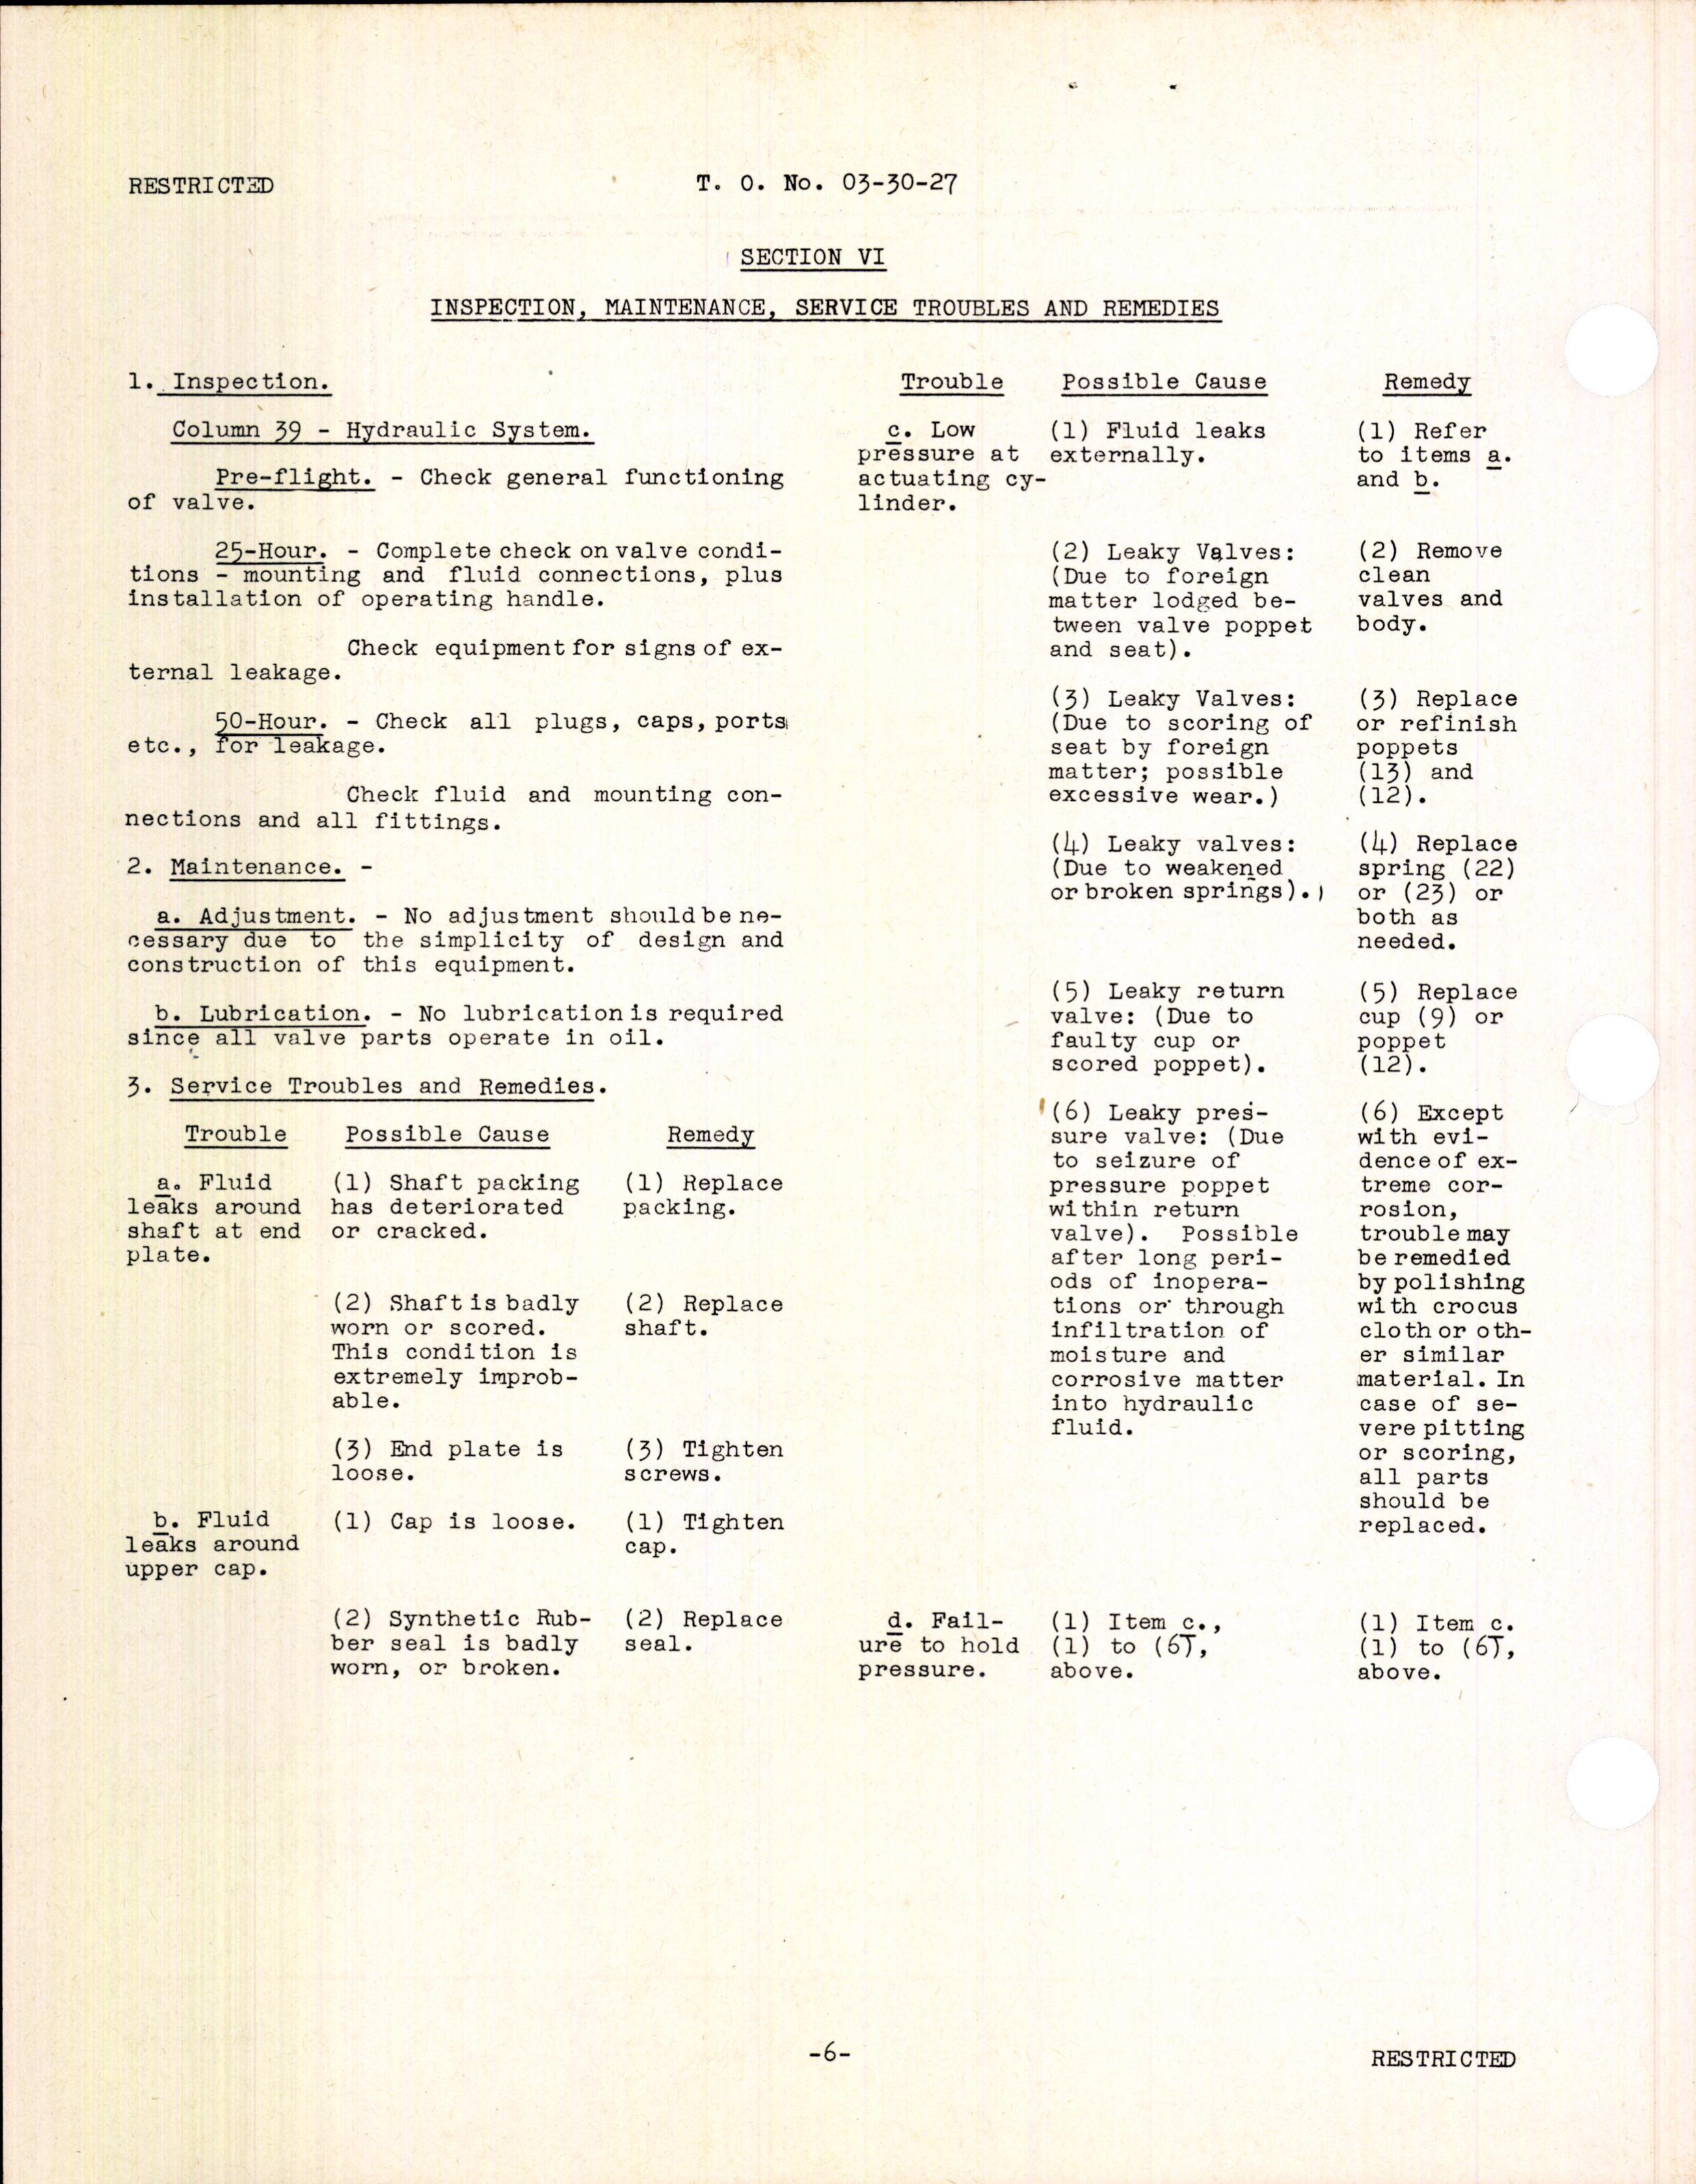 Sample page 8 from AirCorps Library document: Handbook of Instructions with Parts Catalog for Hydraulic Selector Valves